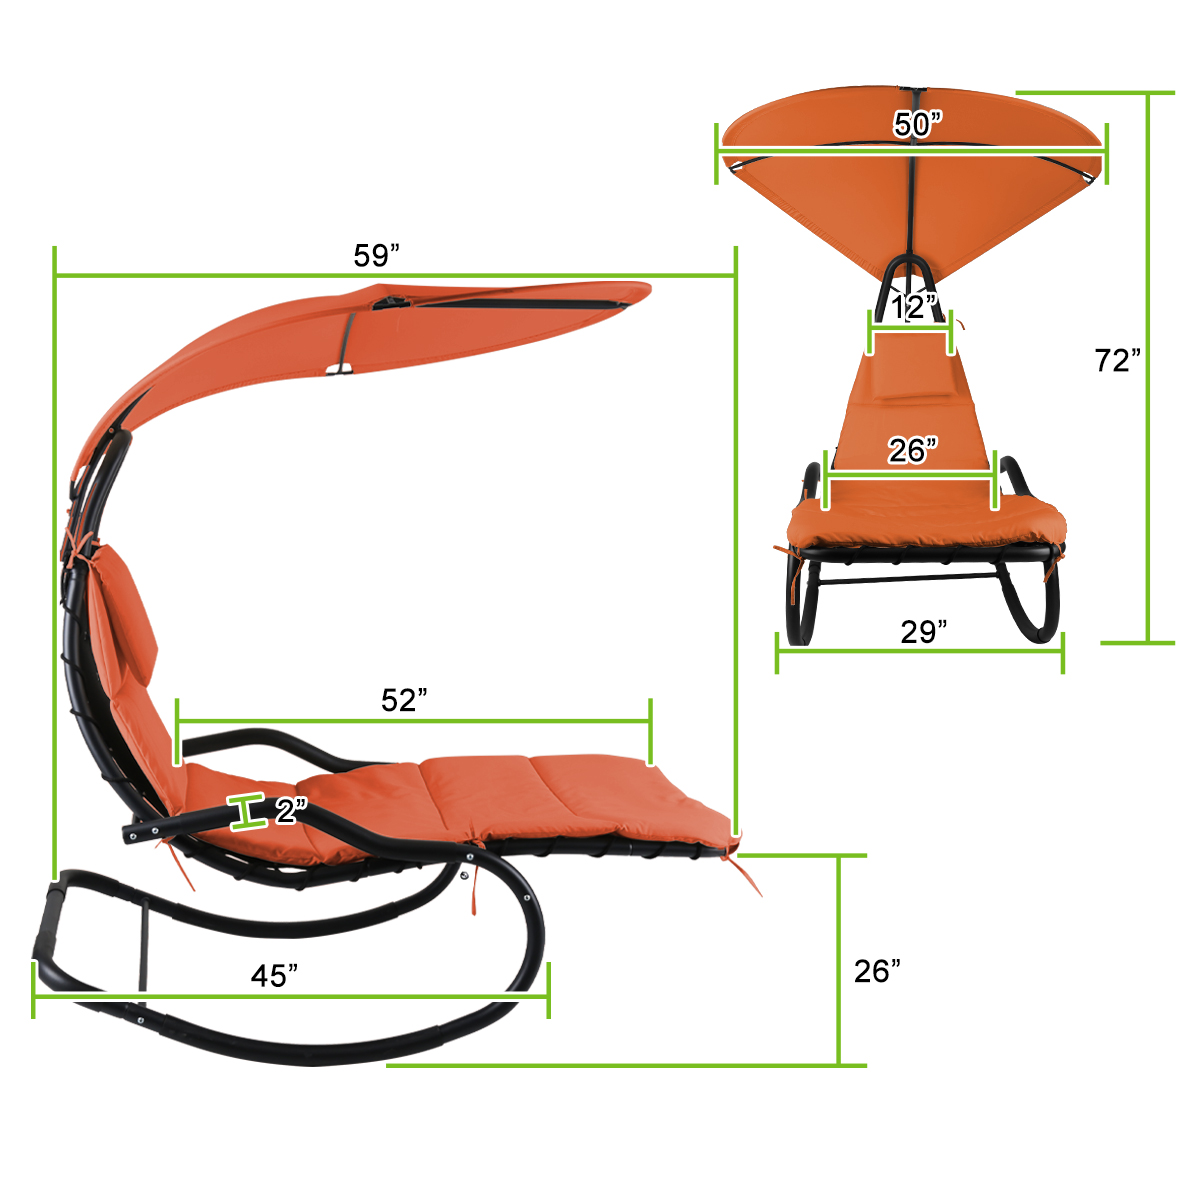 Rocking Hanging Lounge Chair - Curved Chaise Rocking Lounge Chair Swing For Backyard Patio w/ Built-in Pillow Removable Canopy with stand {Orange} - image 4 of 8